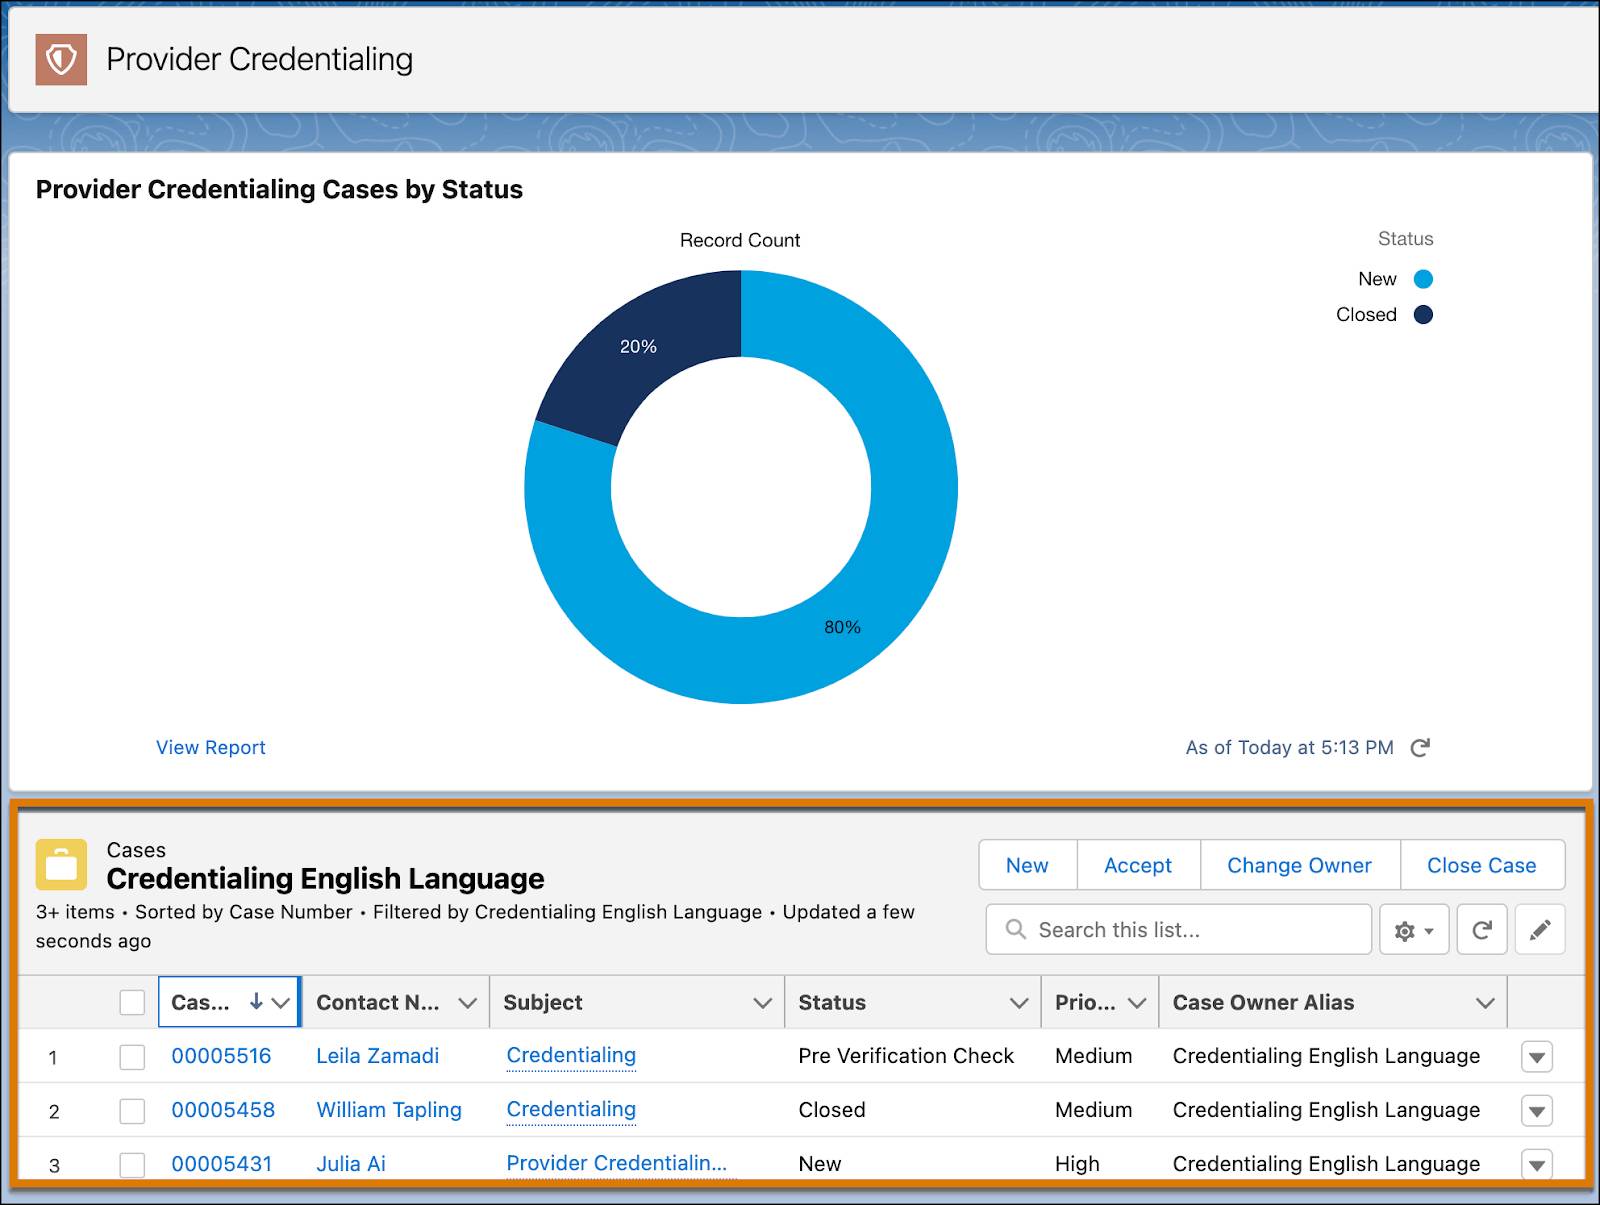 Provider Credentialing page showing the Credentialing English Language queue and metrics related to cases